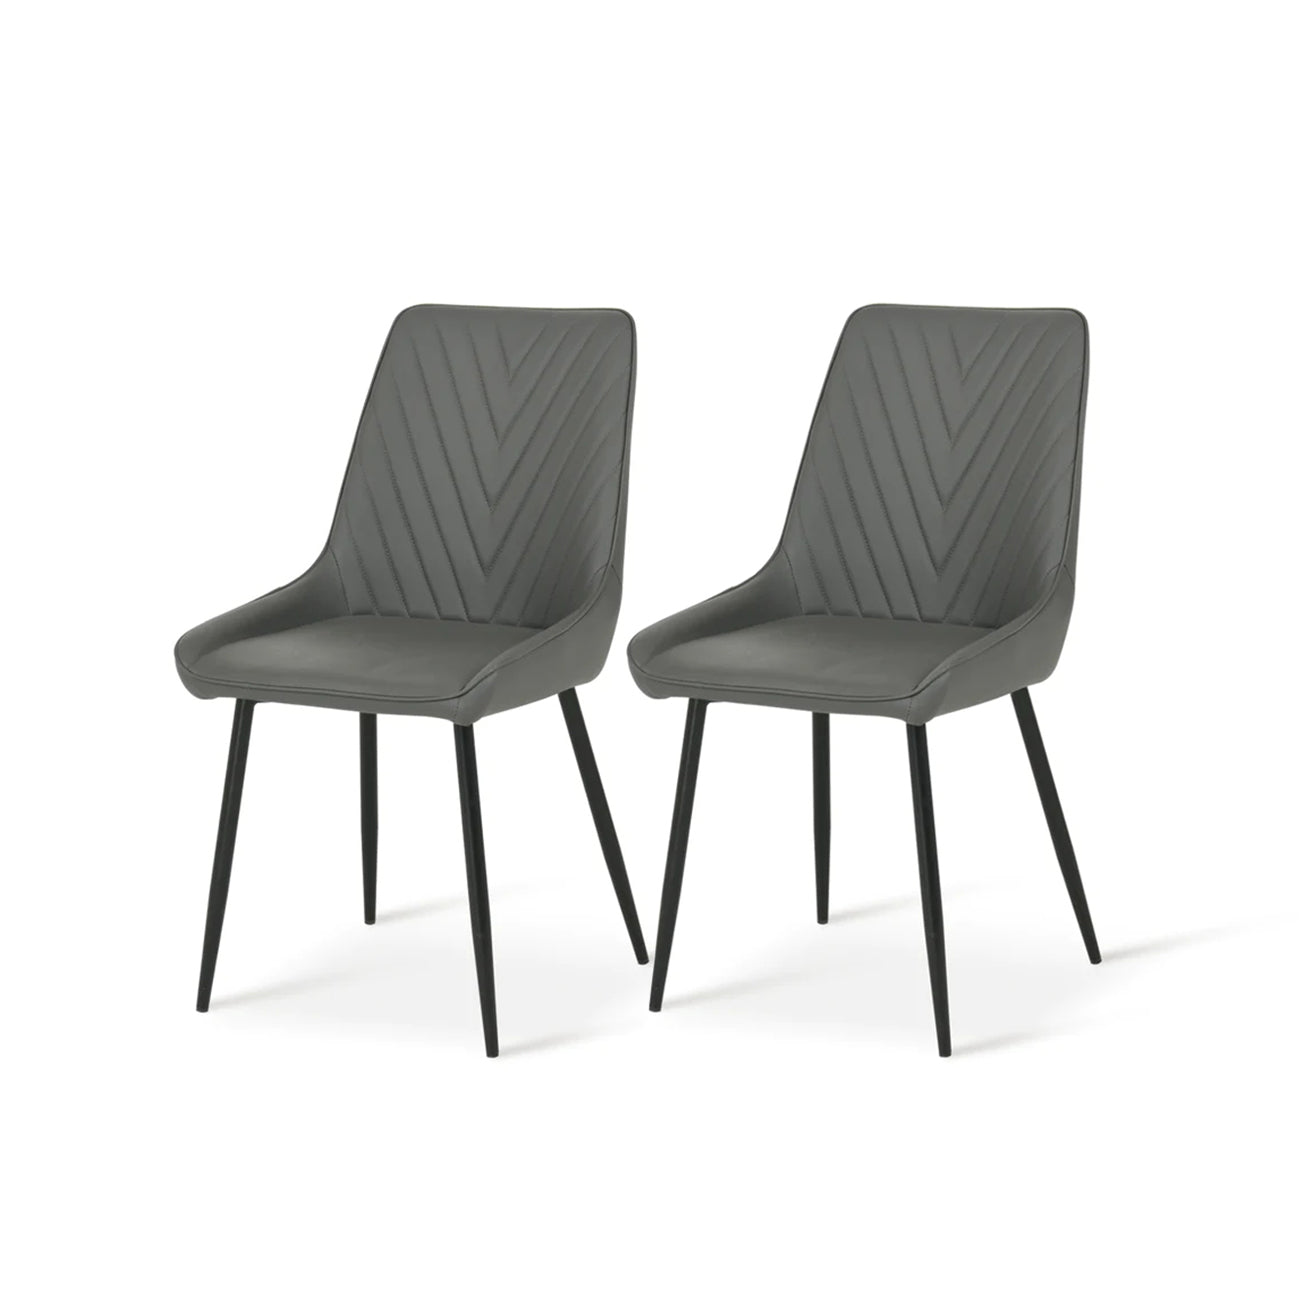 Zack V Dining Chairs [Set of 2] [Pu Leather]